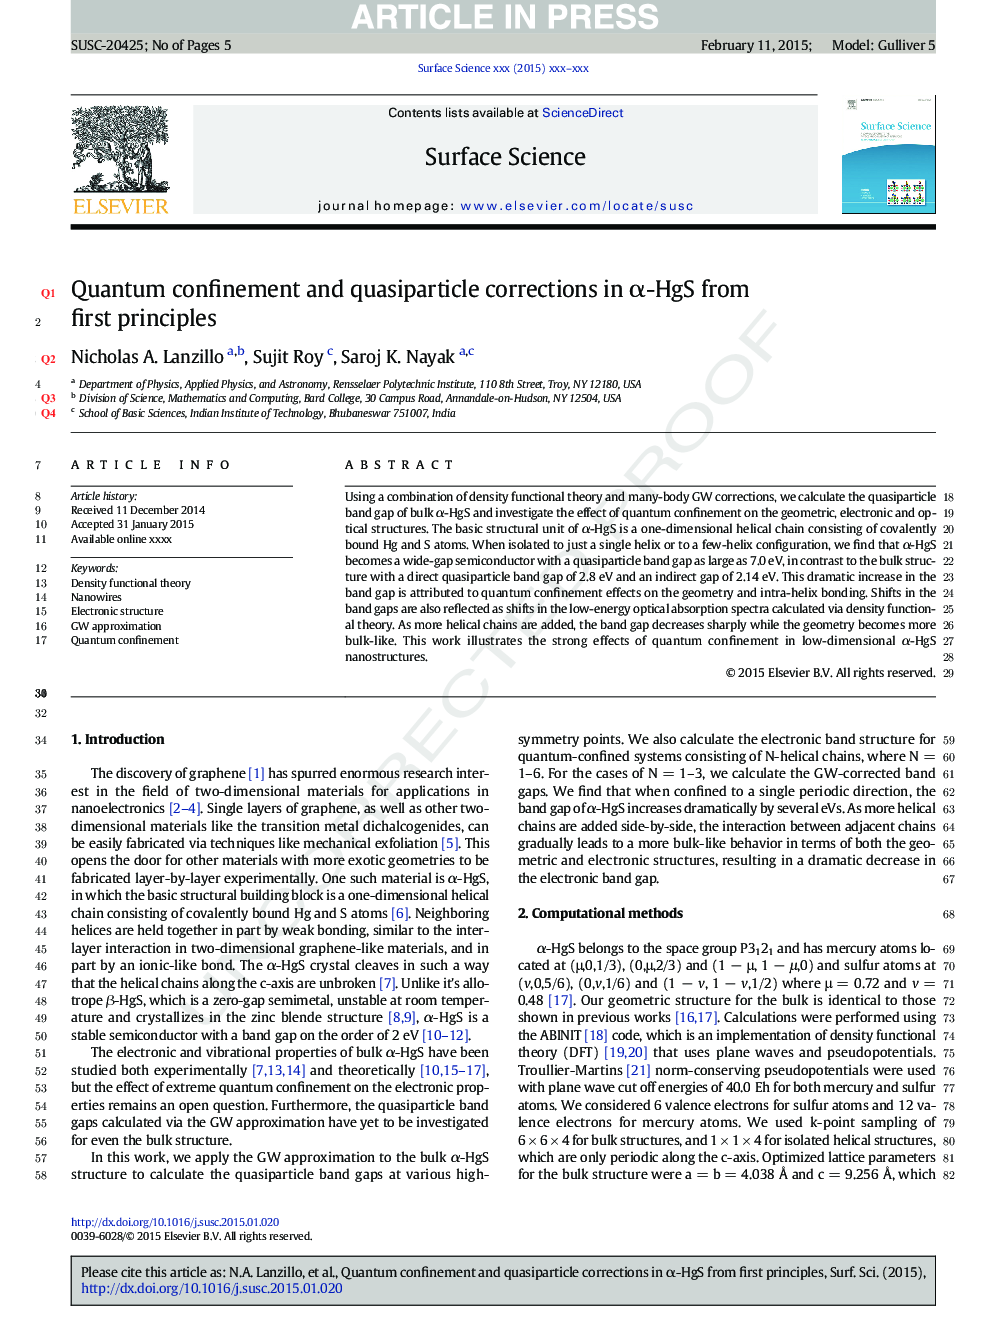 Quantum confinement and quasiparticle corrections in Î±-HgS from first principles